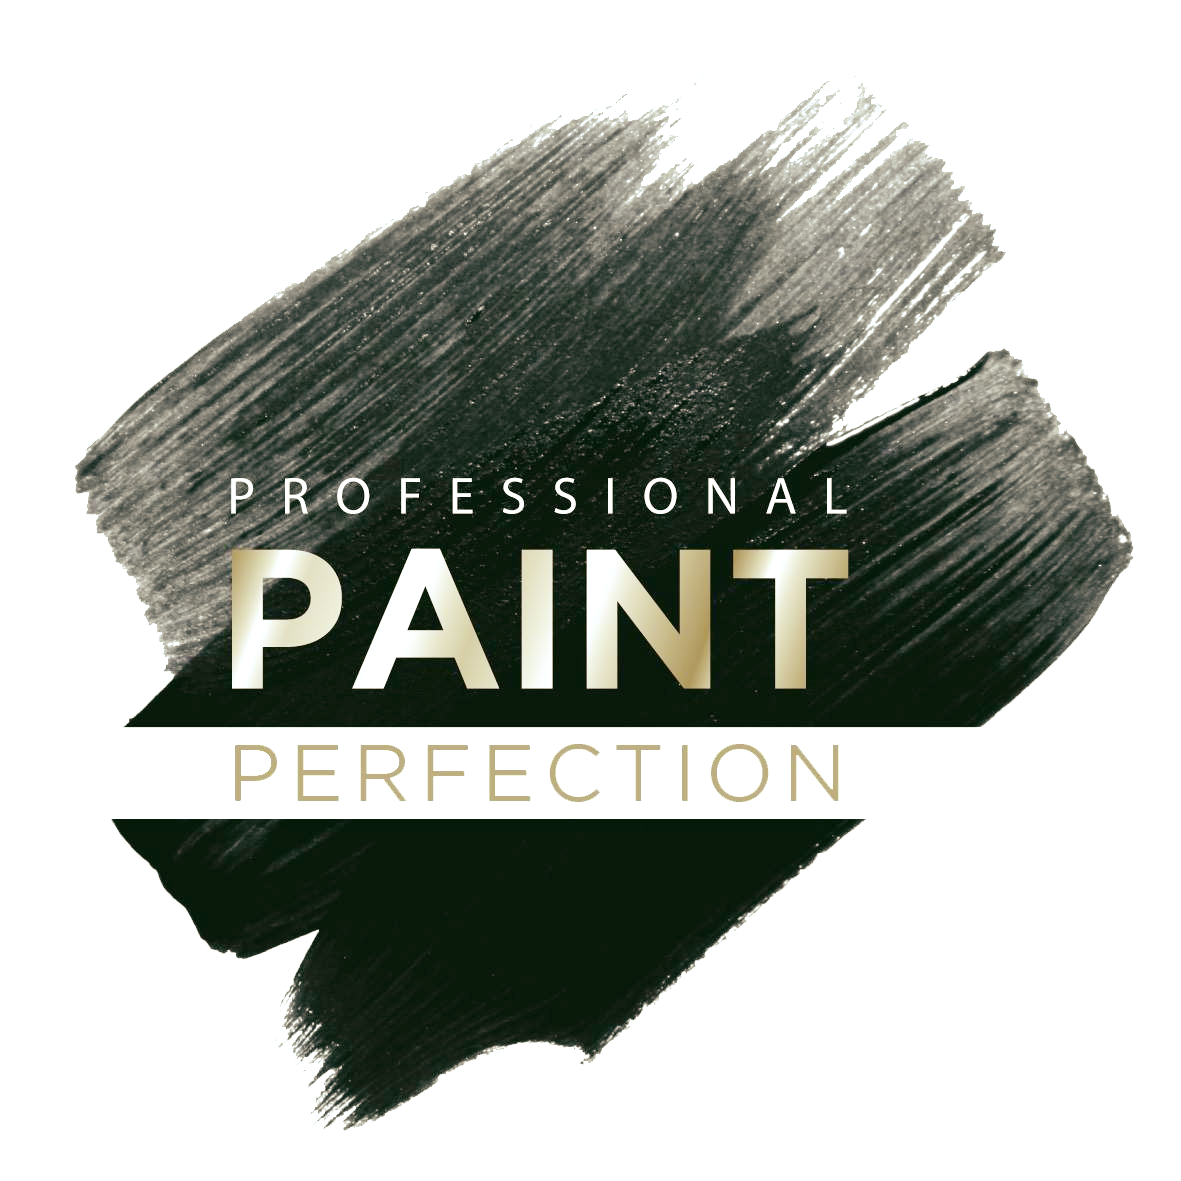 Professional Paint Perfection